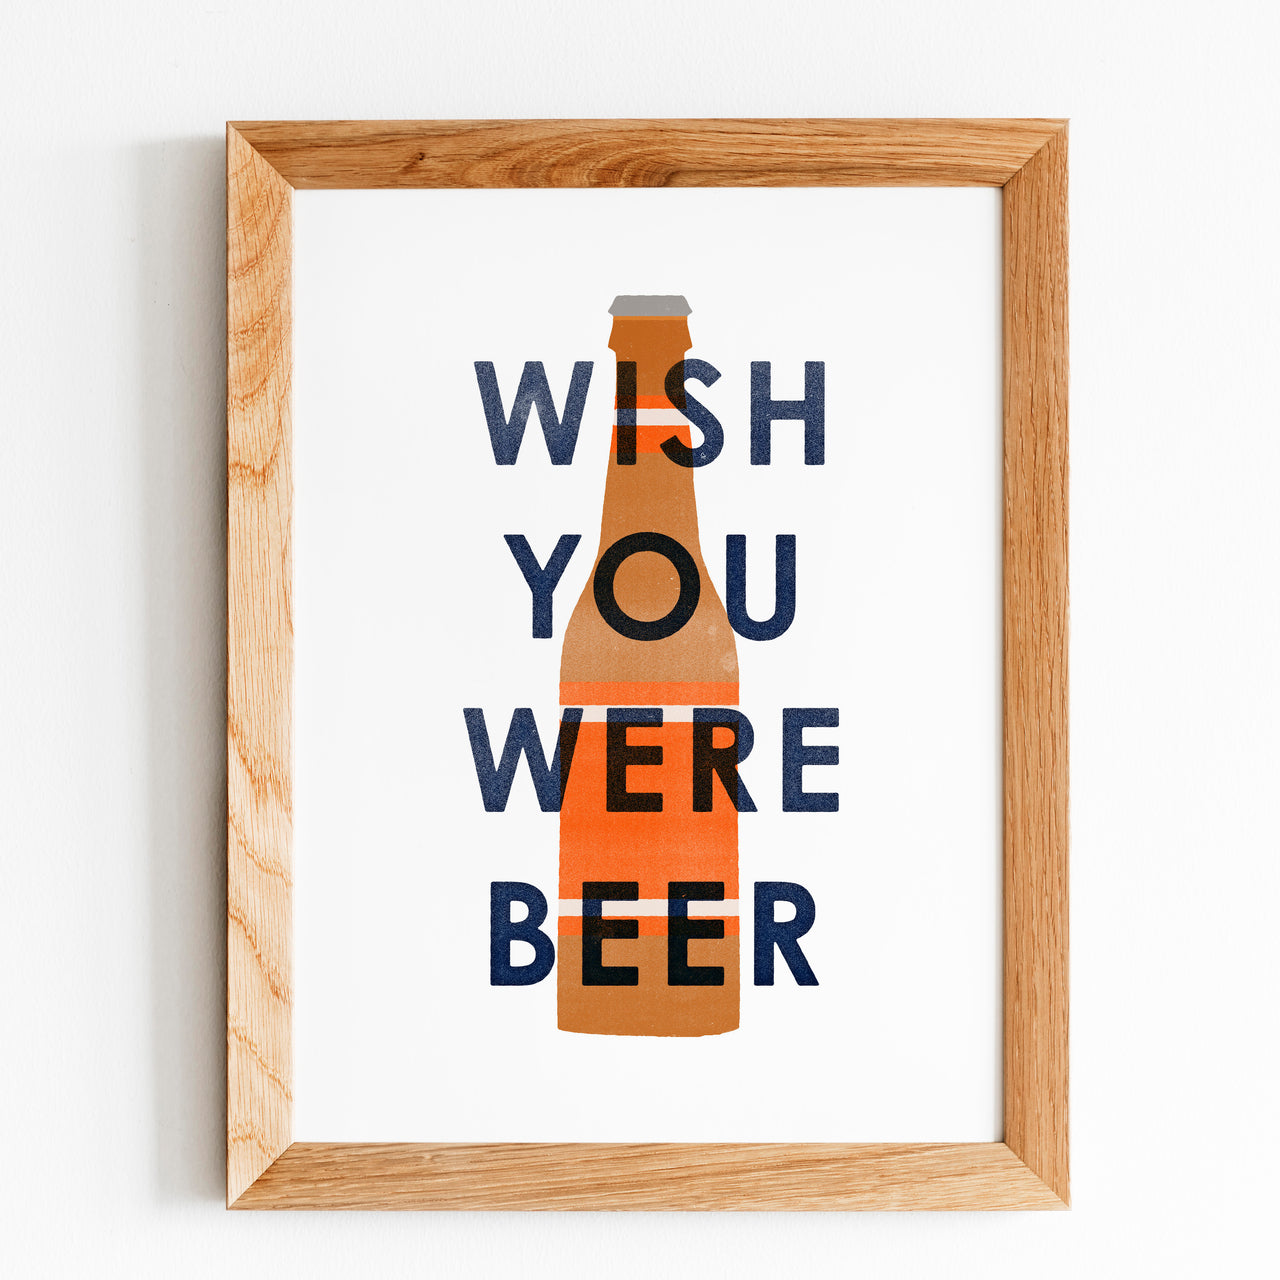 'Wish You Were Beer' Print by Gert & Co in a Frame